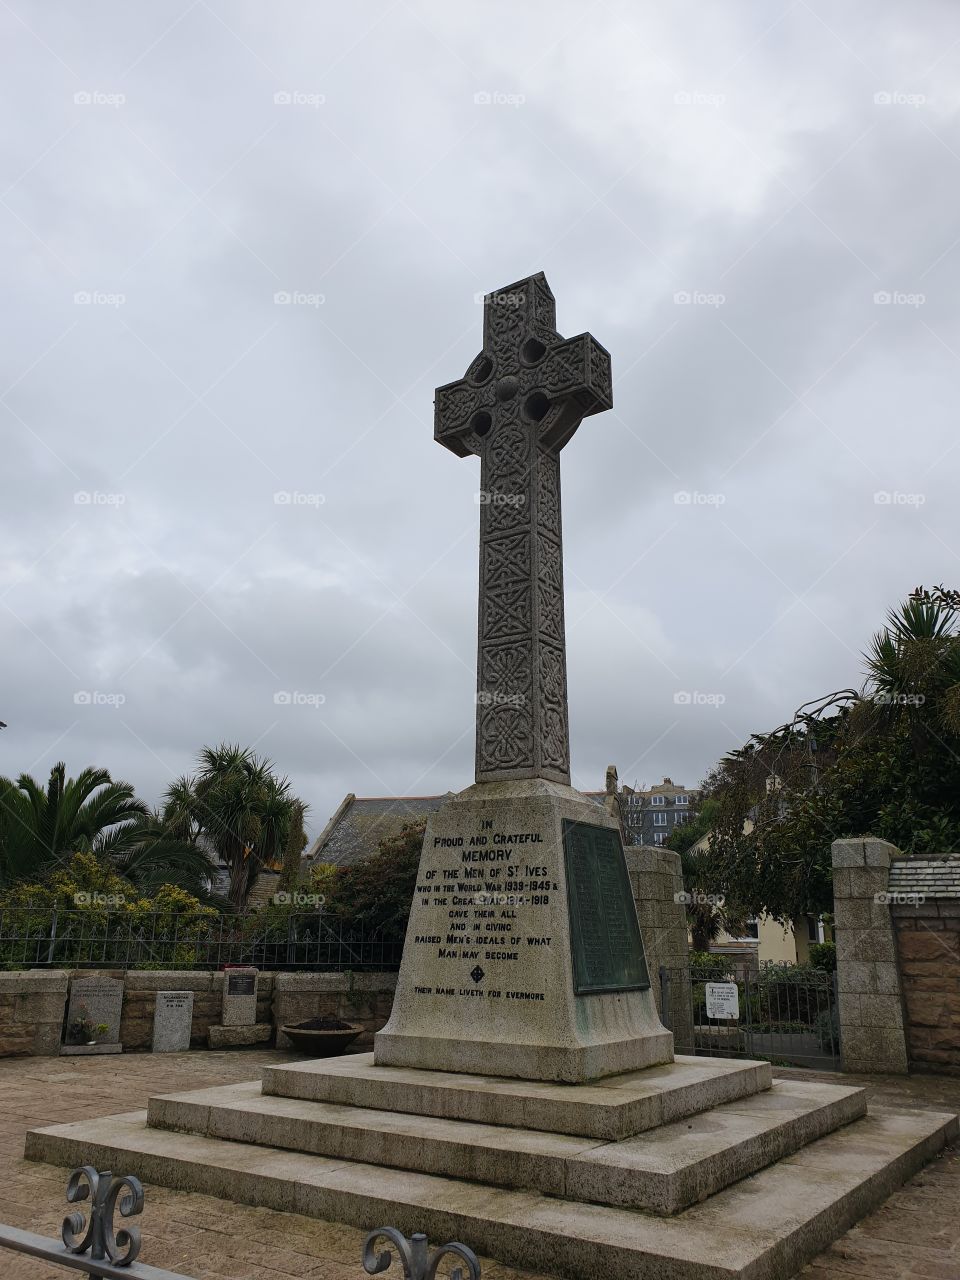 St Ives cross monument,Cornwall,England.